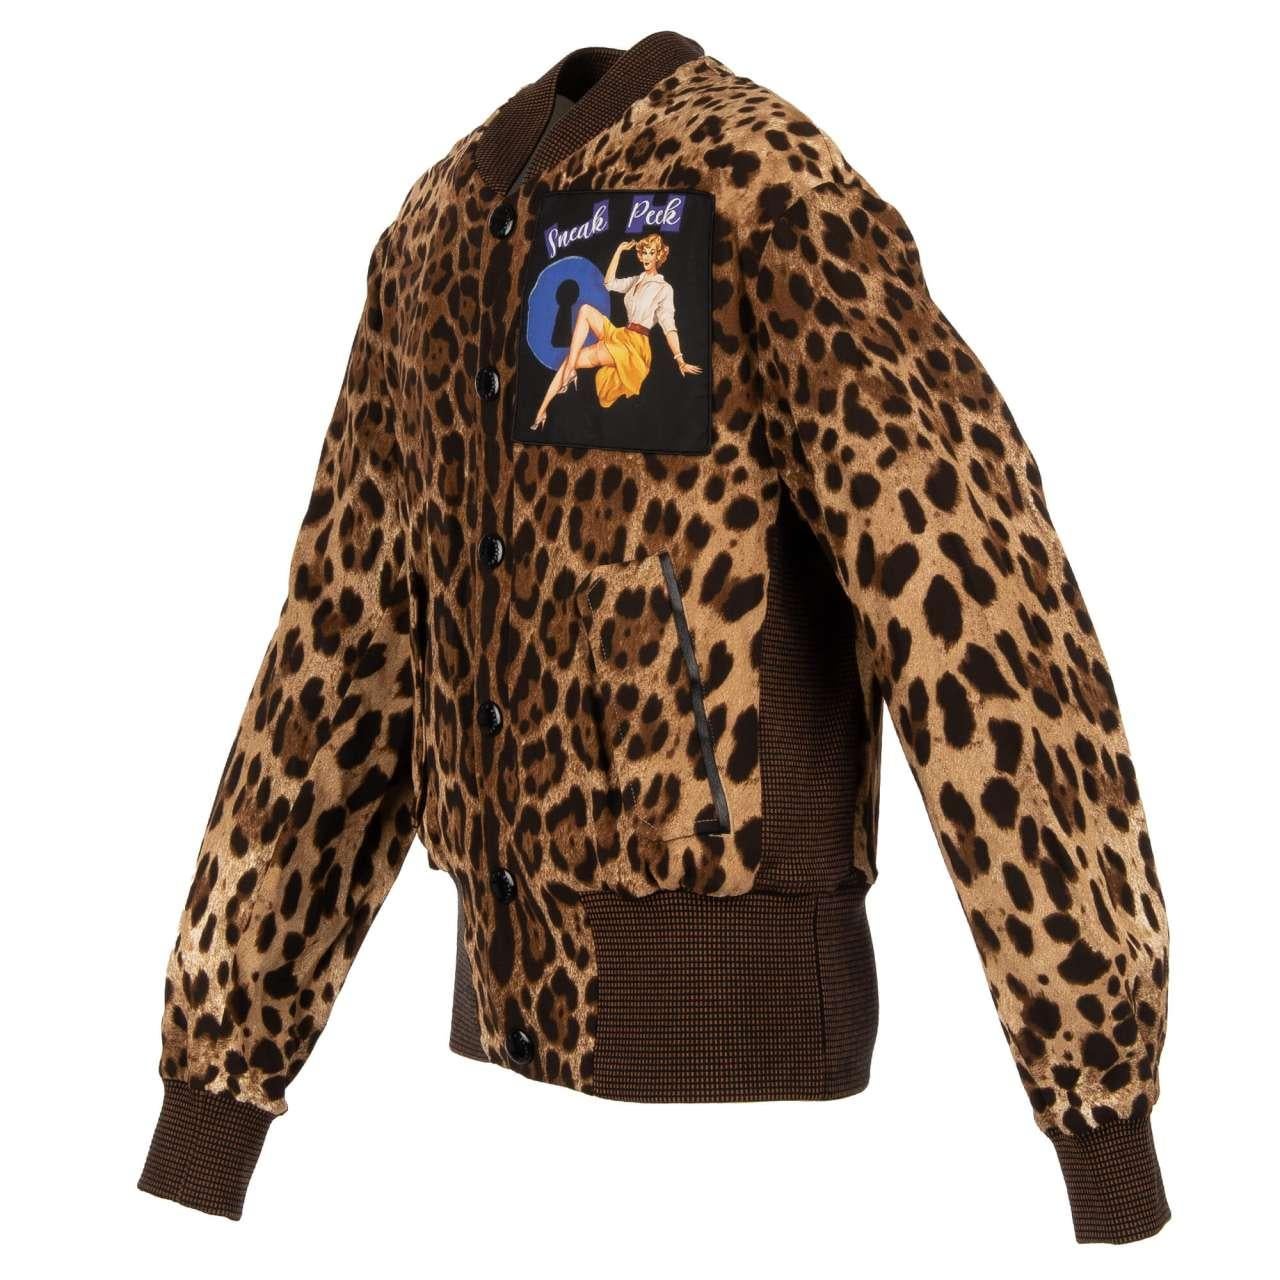 Dolce & Gabbana Leopard Printed Bomber Jacket with SNEAK PEEK Patch Brown 48 In Excellent Condition For Sale In Erkrath, DE